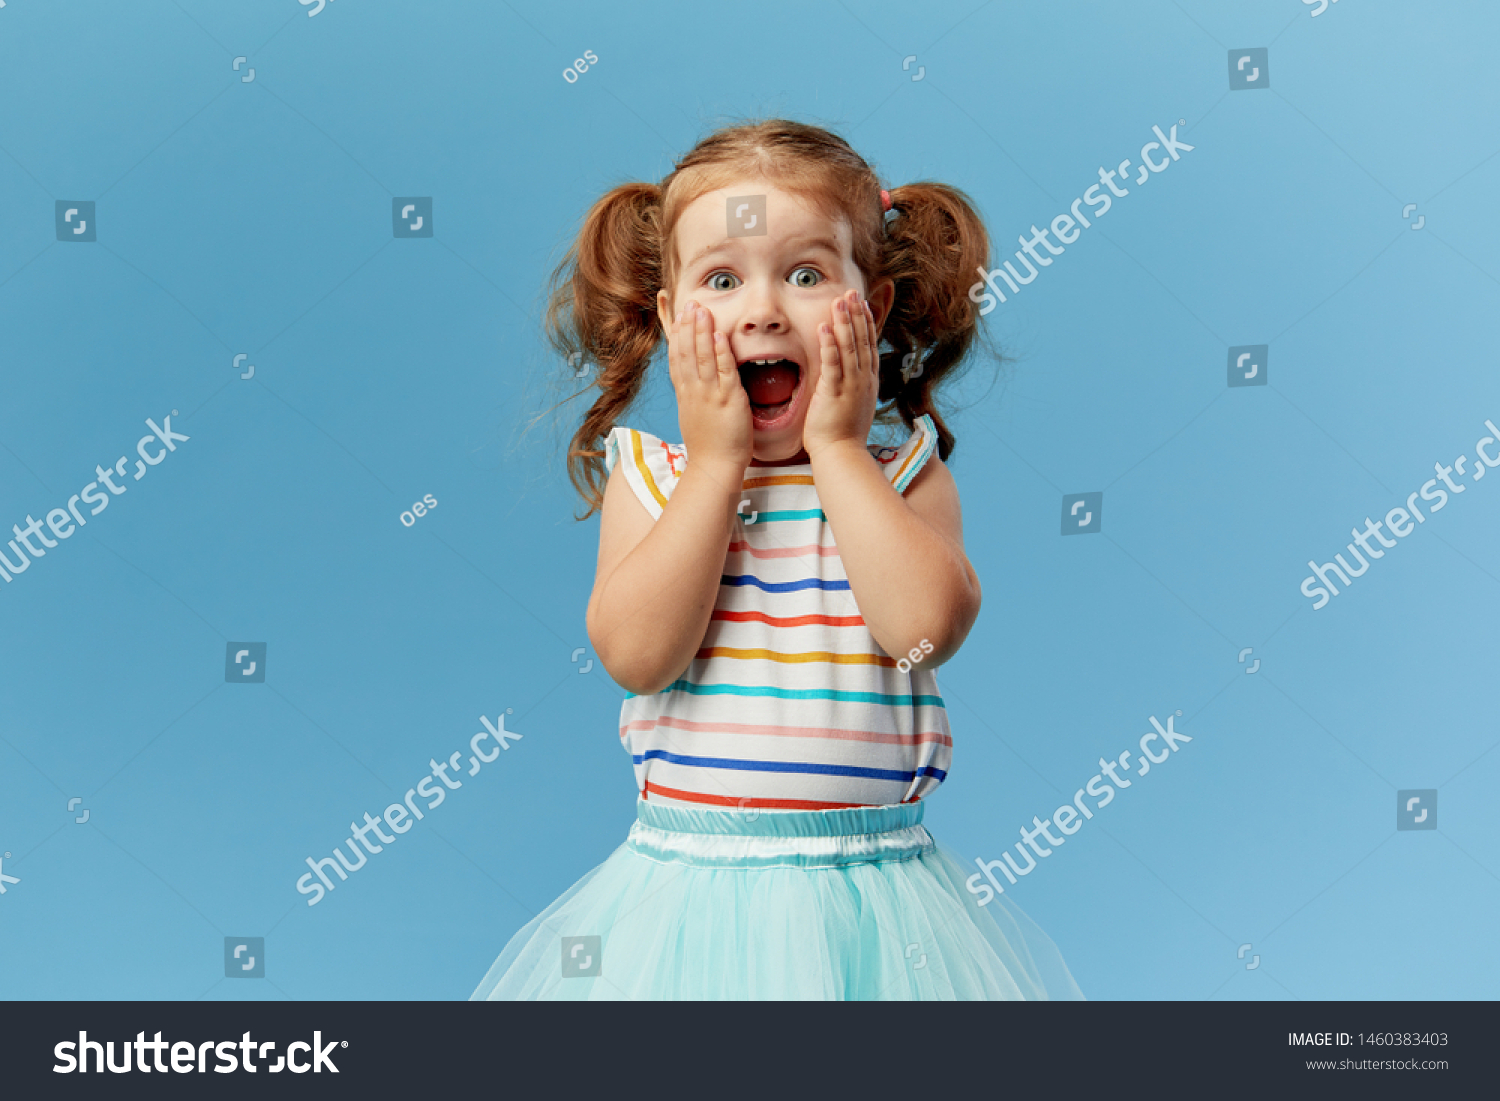 Portrait of surprised cute little toddler girl child standing isolated over blue background. Looking at camera. hands near open mouth #1460383403